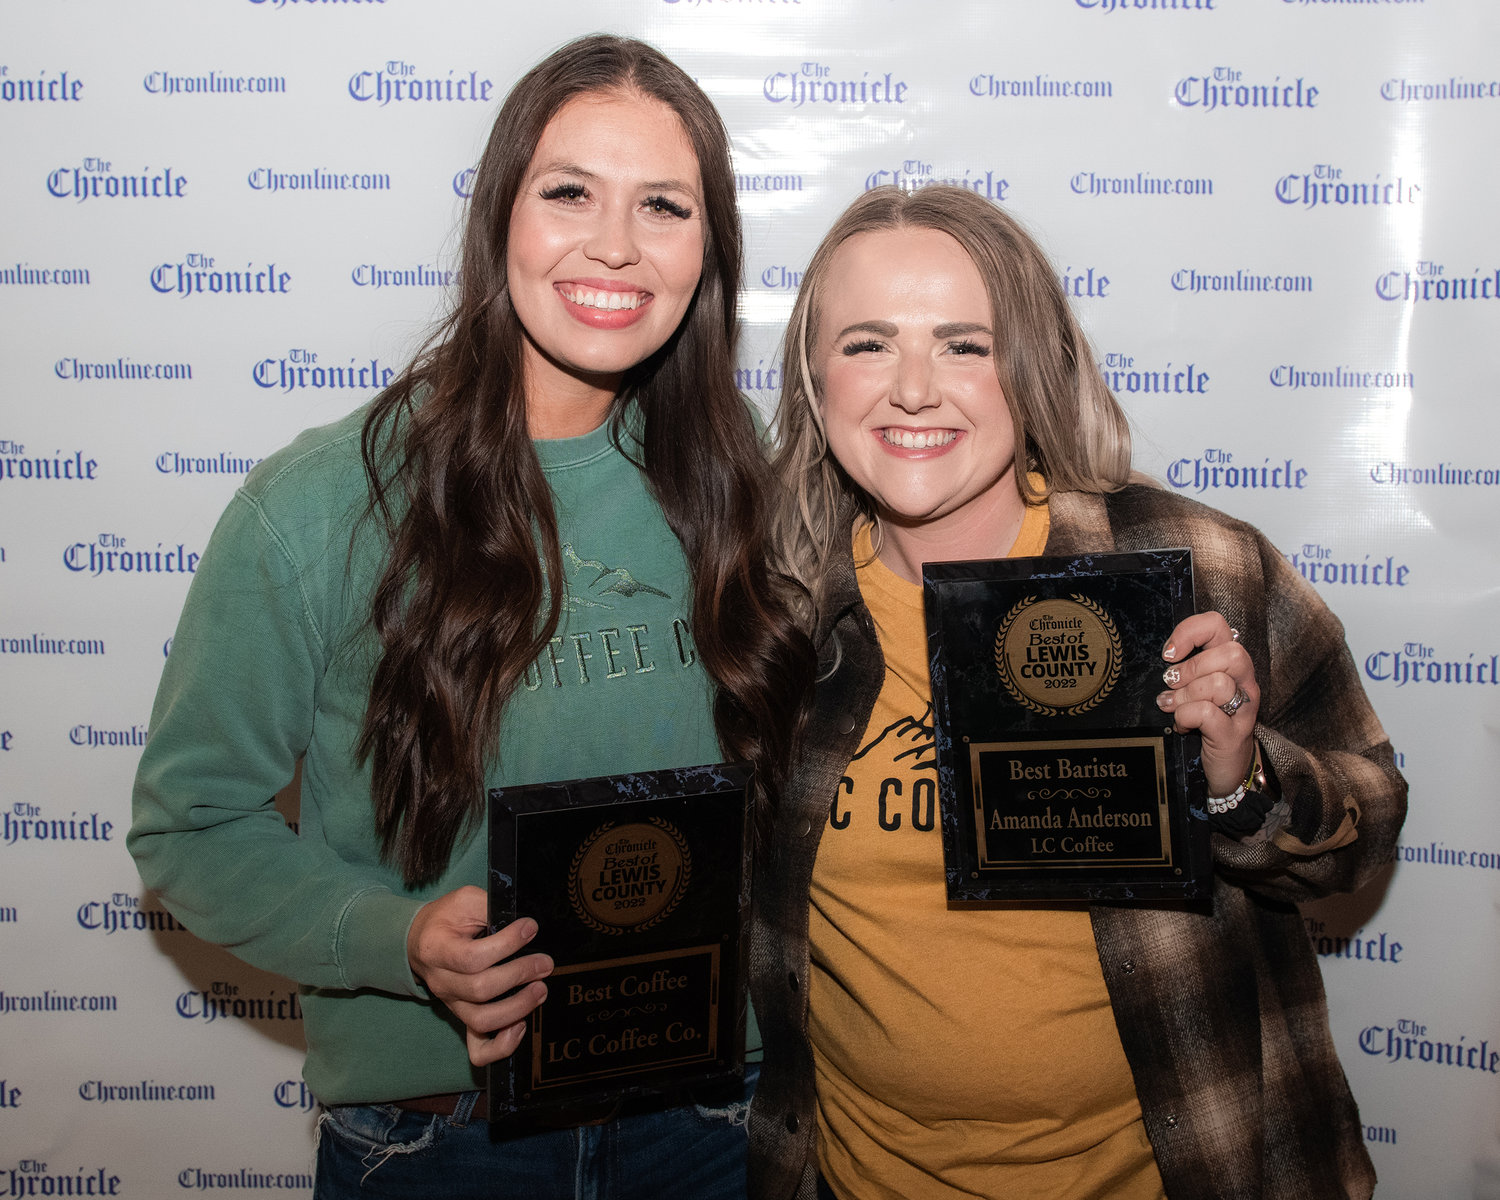 Lewis County Coffee Co. won “Best Coffee” with Amanda Anderson named “Best Barista” during the 2022 Best of Lewis County event hosted by The Chronicle at The Juice Box Thursday evening in Centralia.